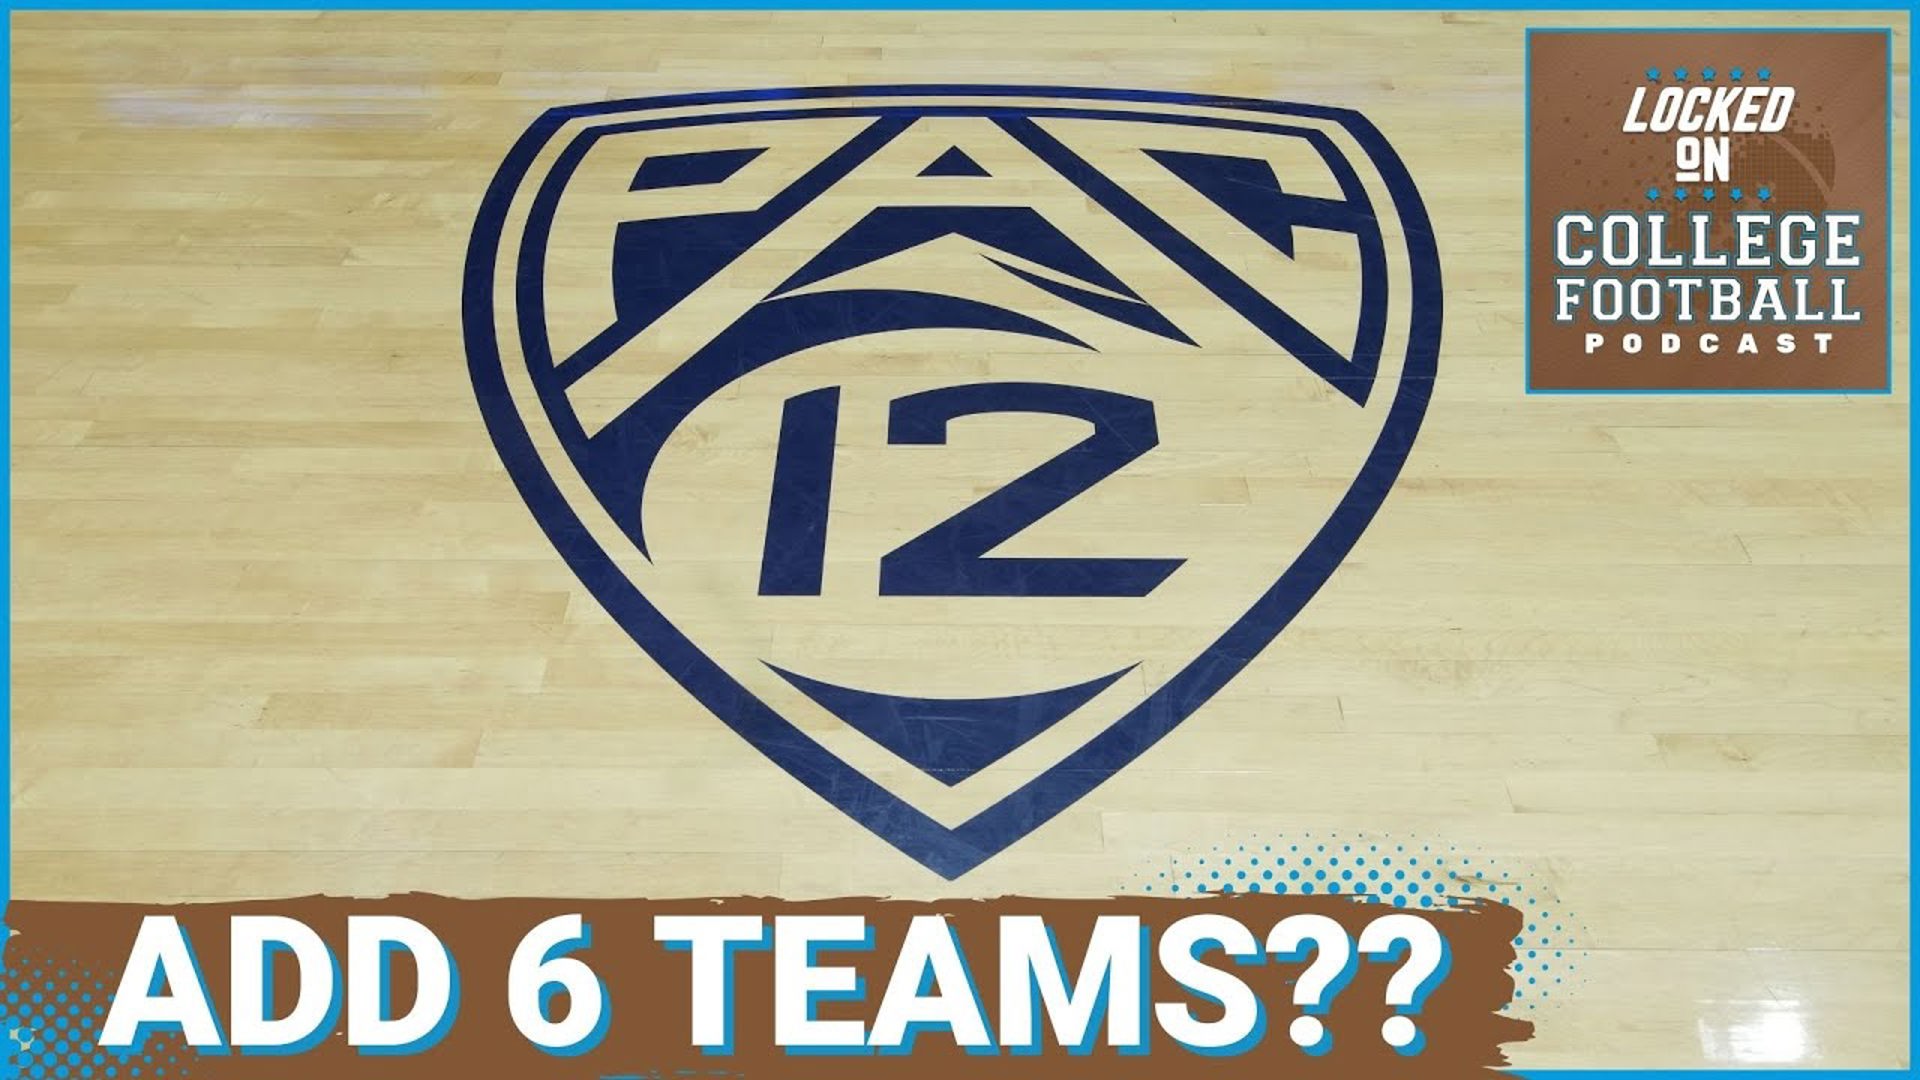 Oregon State Athletic Director Scott Barnes recently said that 8 teams is the right number for the Pac-12 to rebuild to to keep them nimble/flexible.